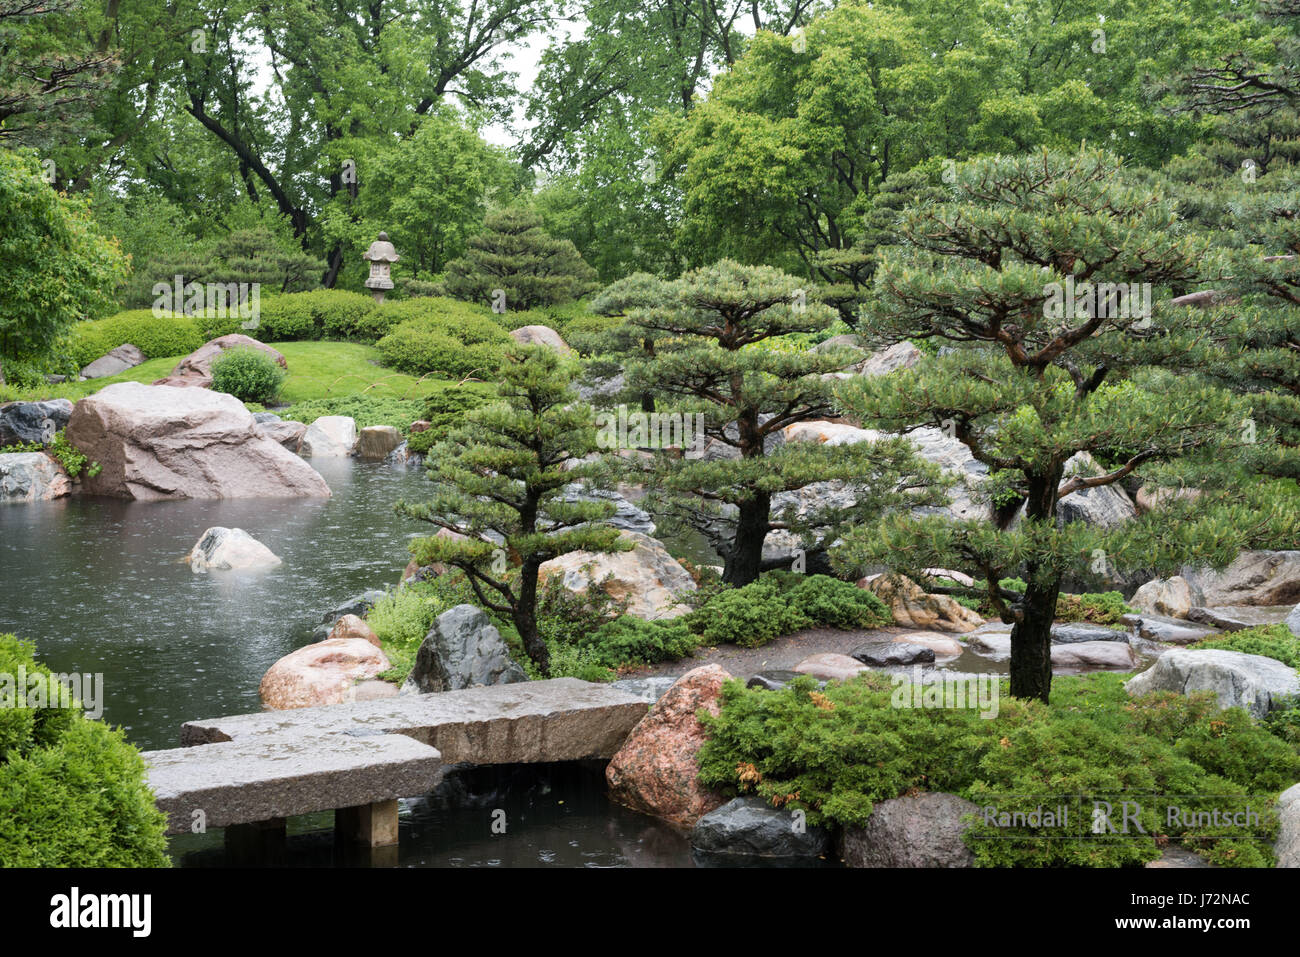 A stone bridge crosses a pond in a Japanaese garden Stock Photo